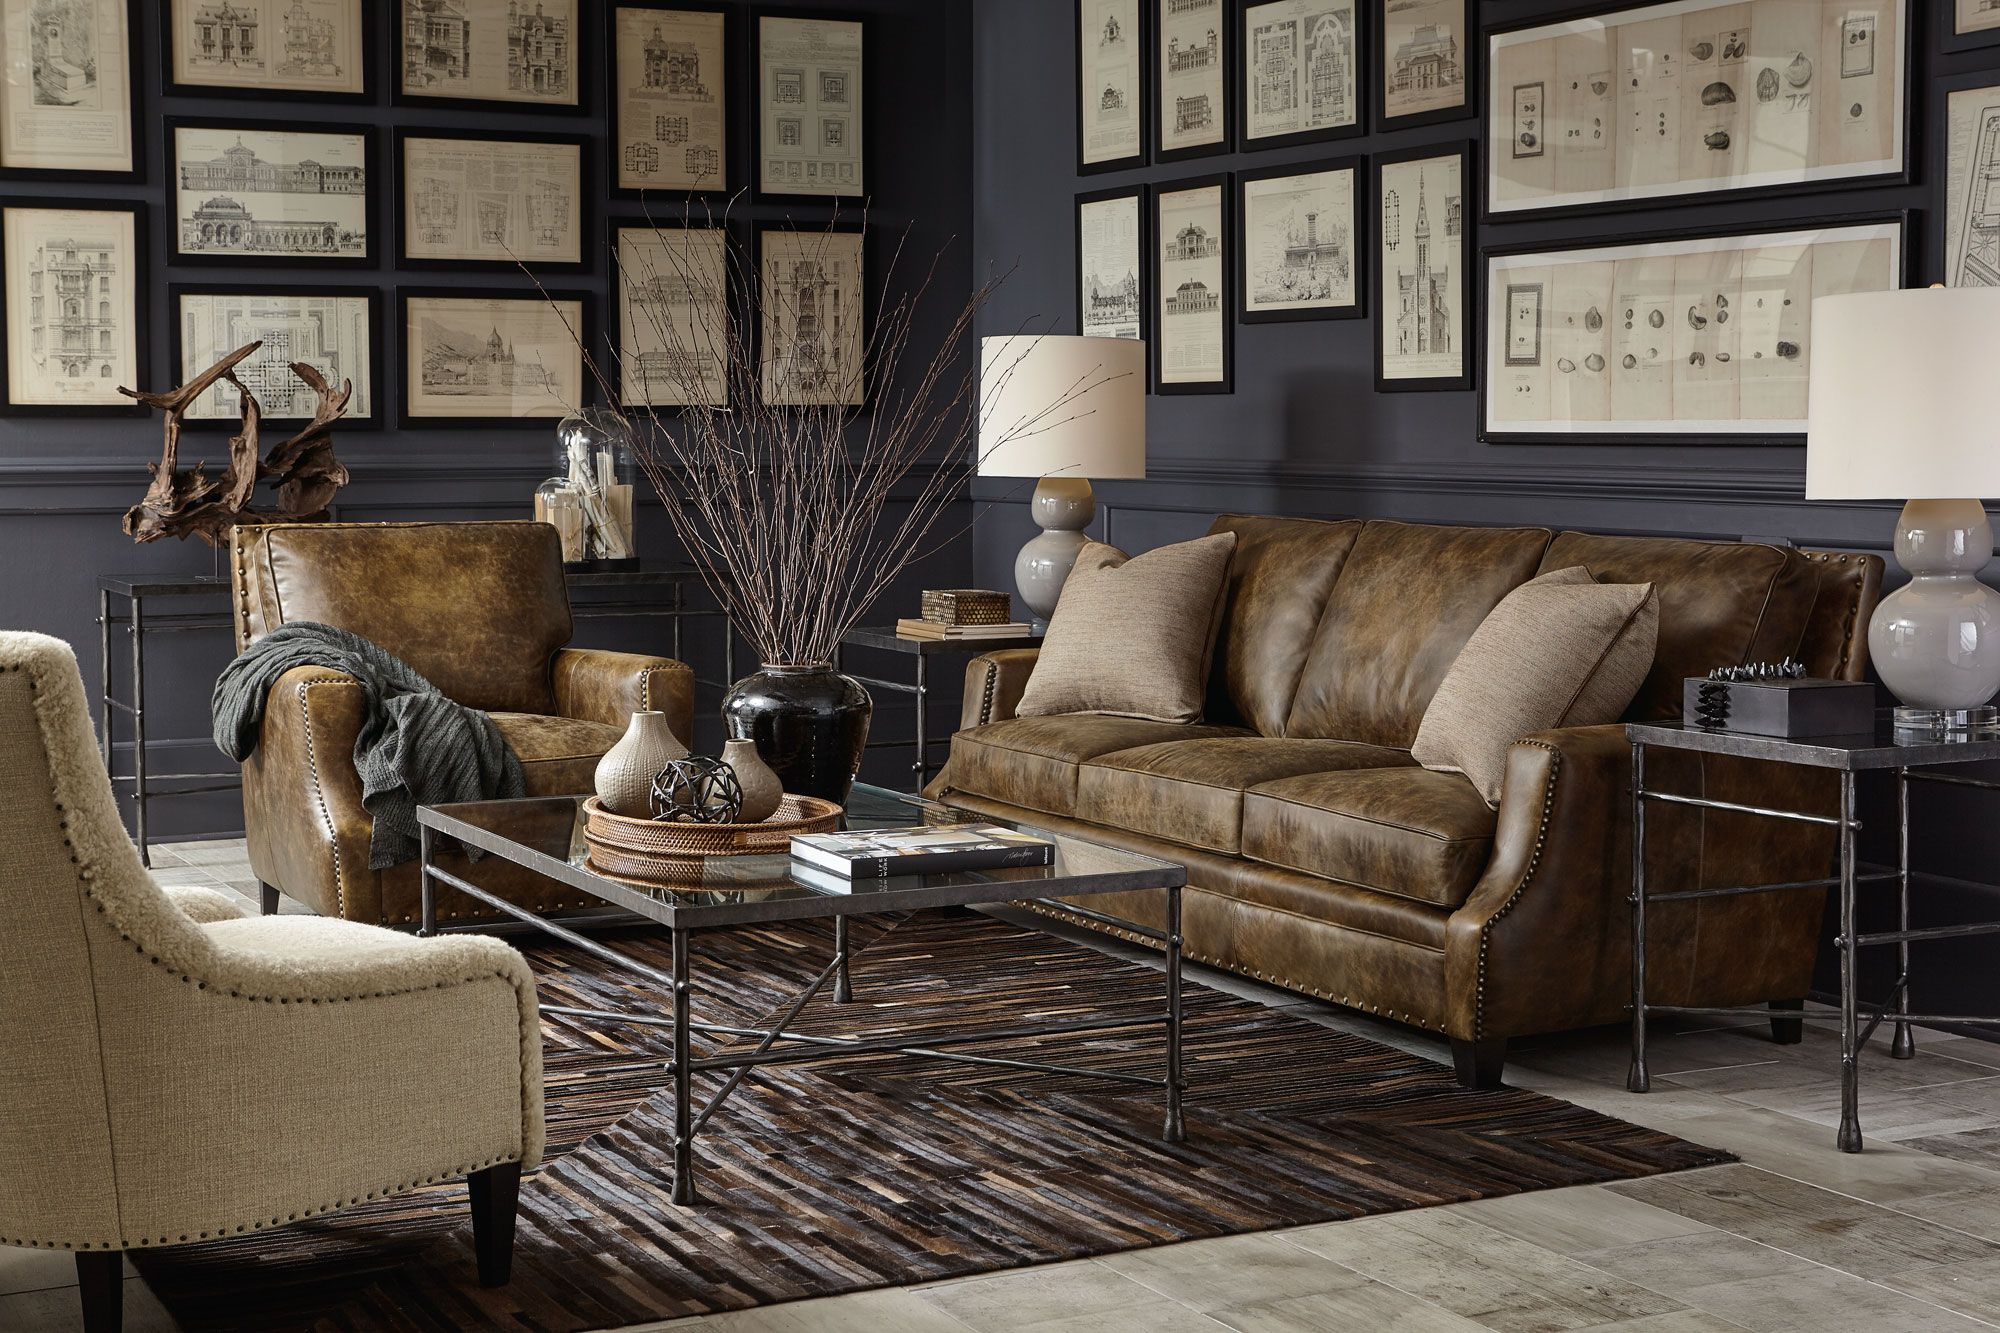 Leather Furniture You Both Can Agree On  Kathy Kuo Blog avec Kathy Kuo Blog 